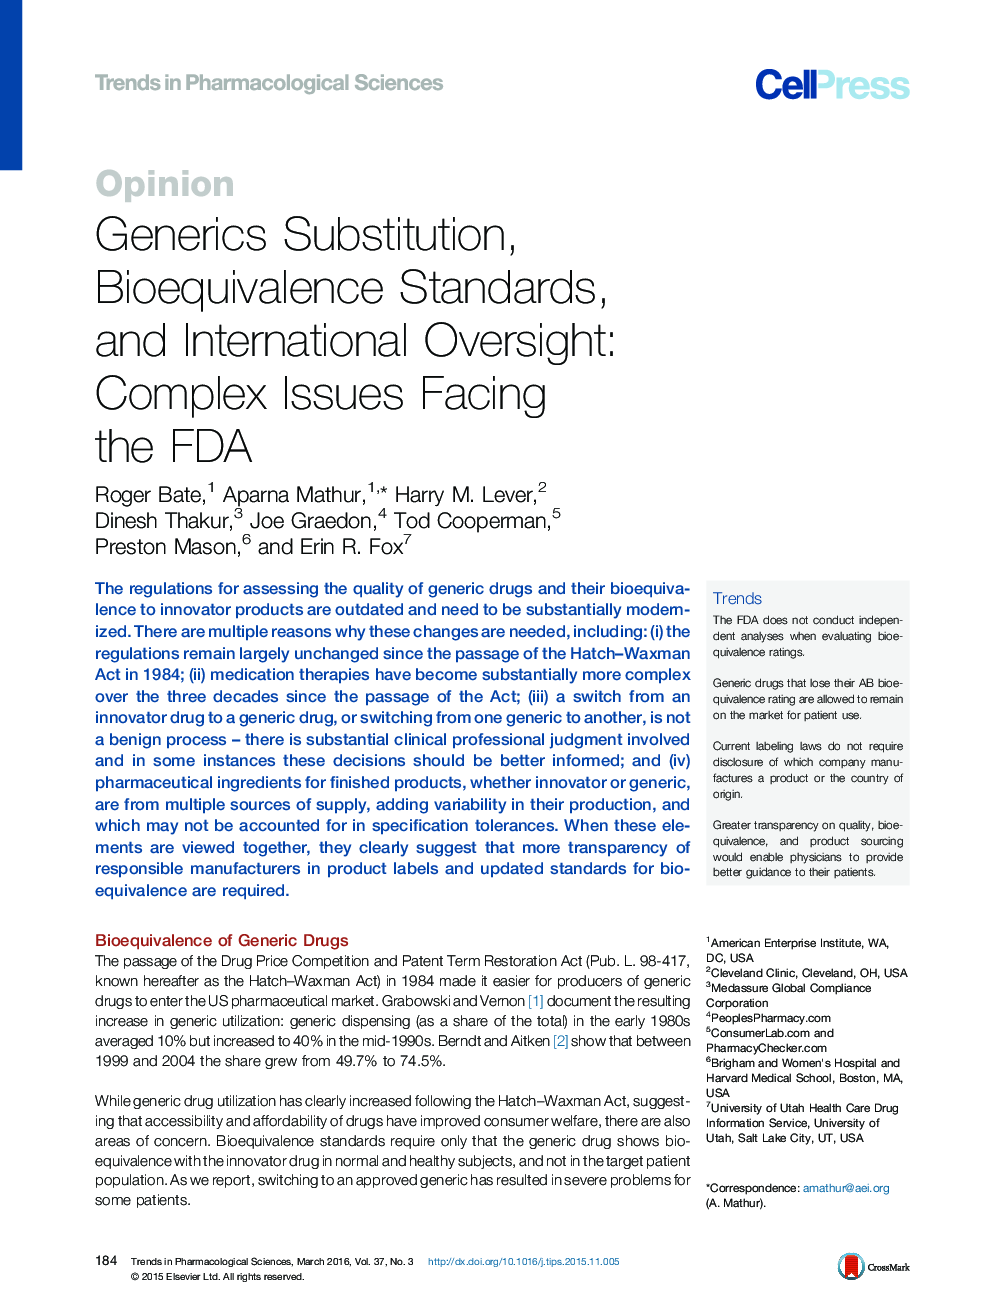 Generics Substitution, Bioequivalence Standards, and International Oversight: Complex Issues Facing the FDA